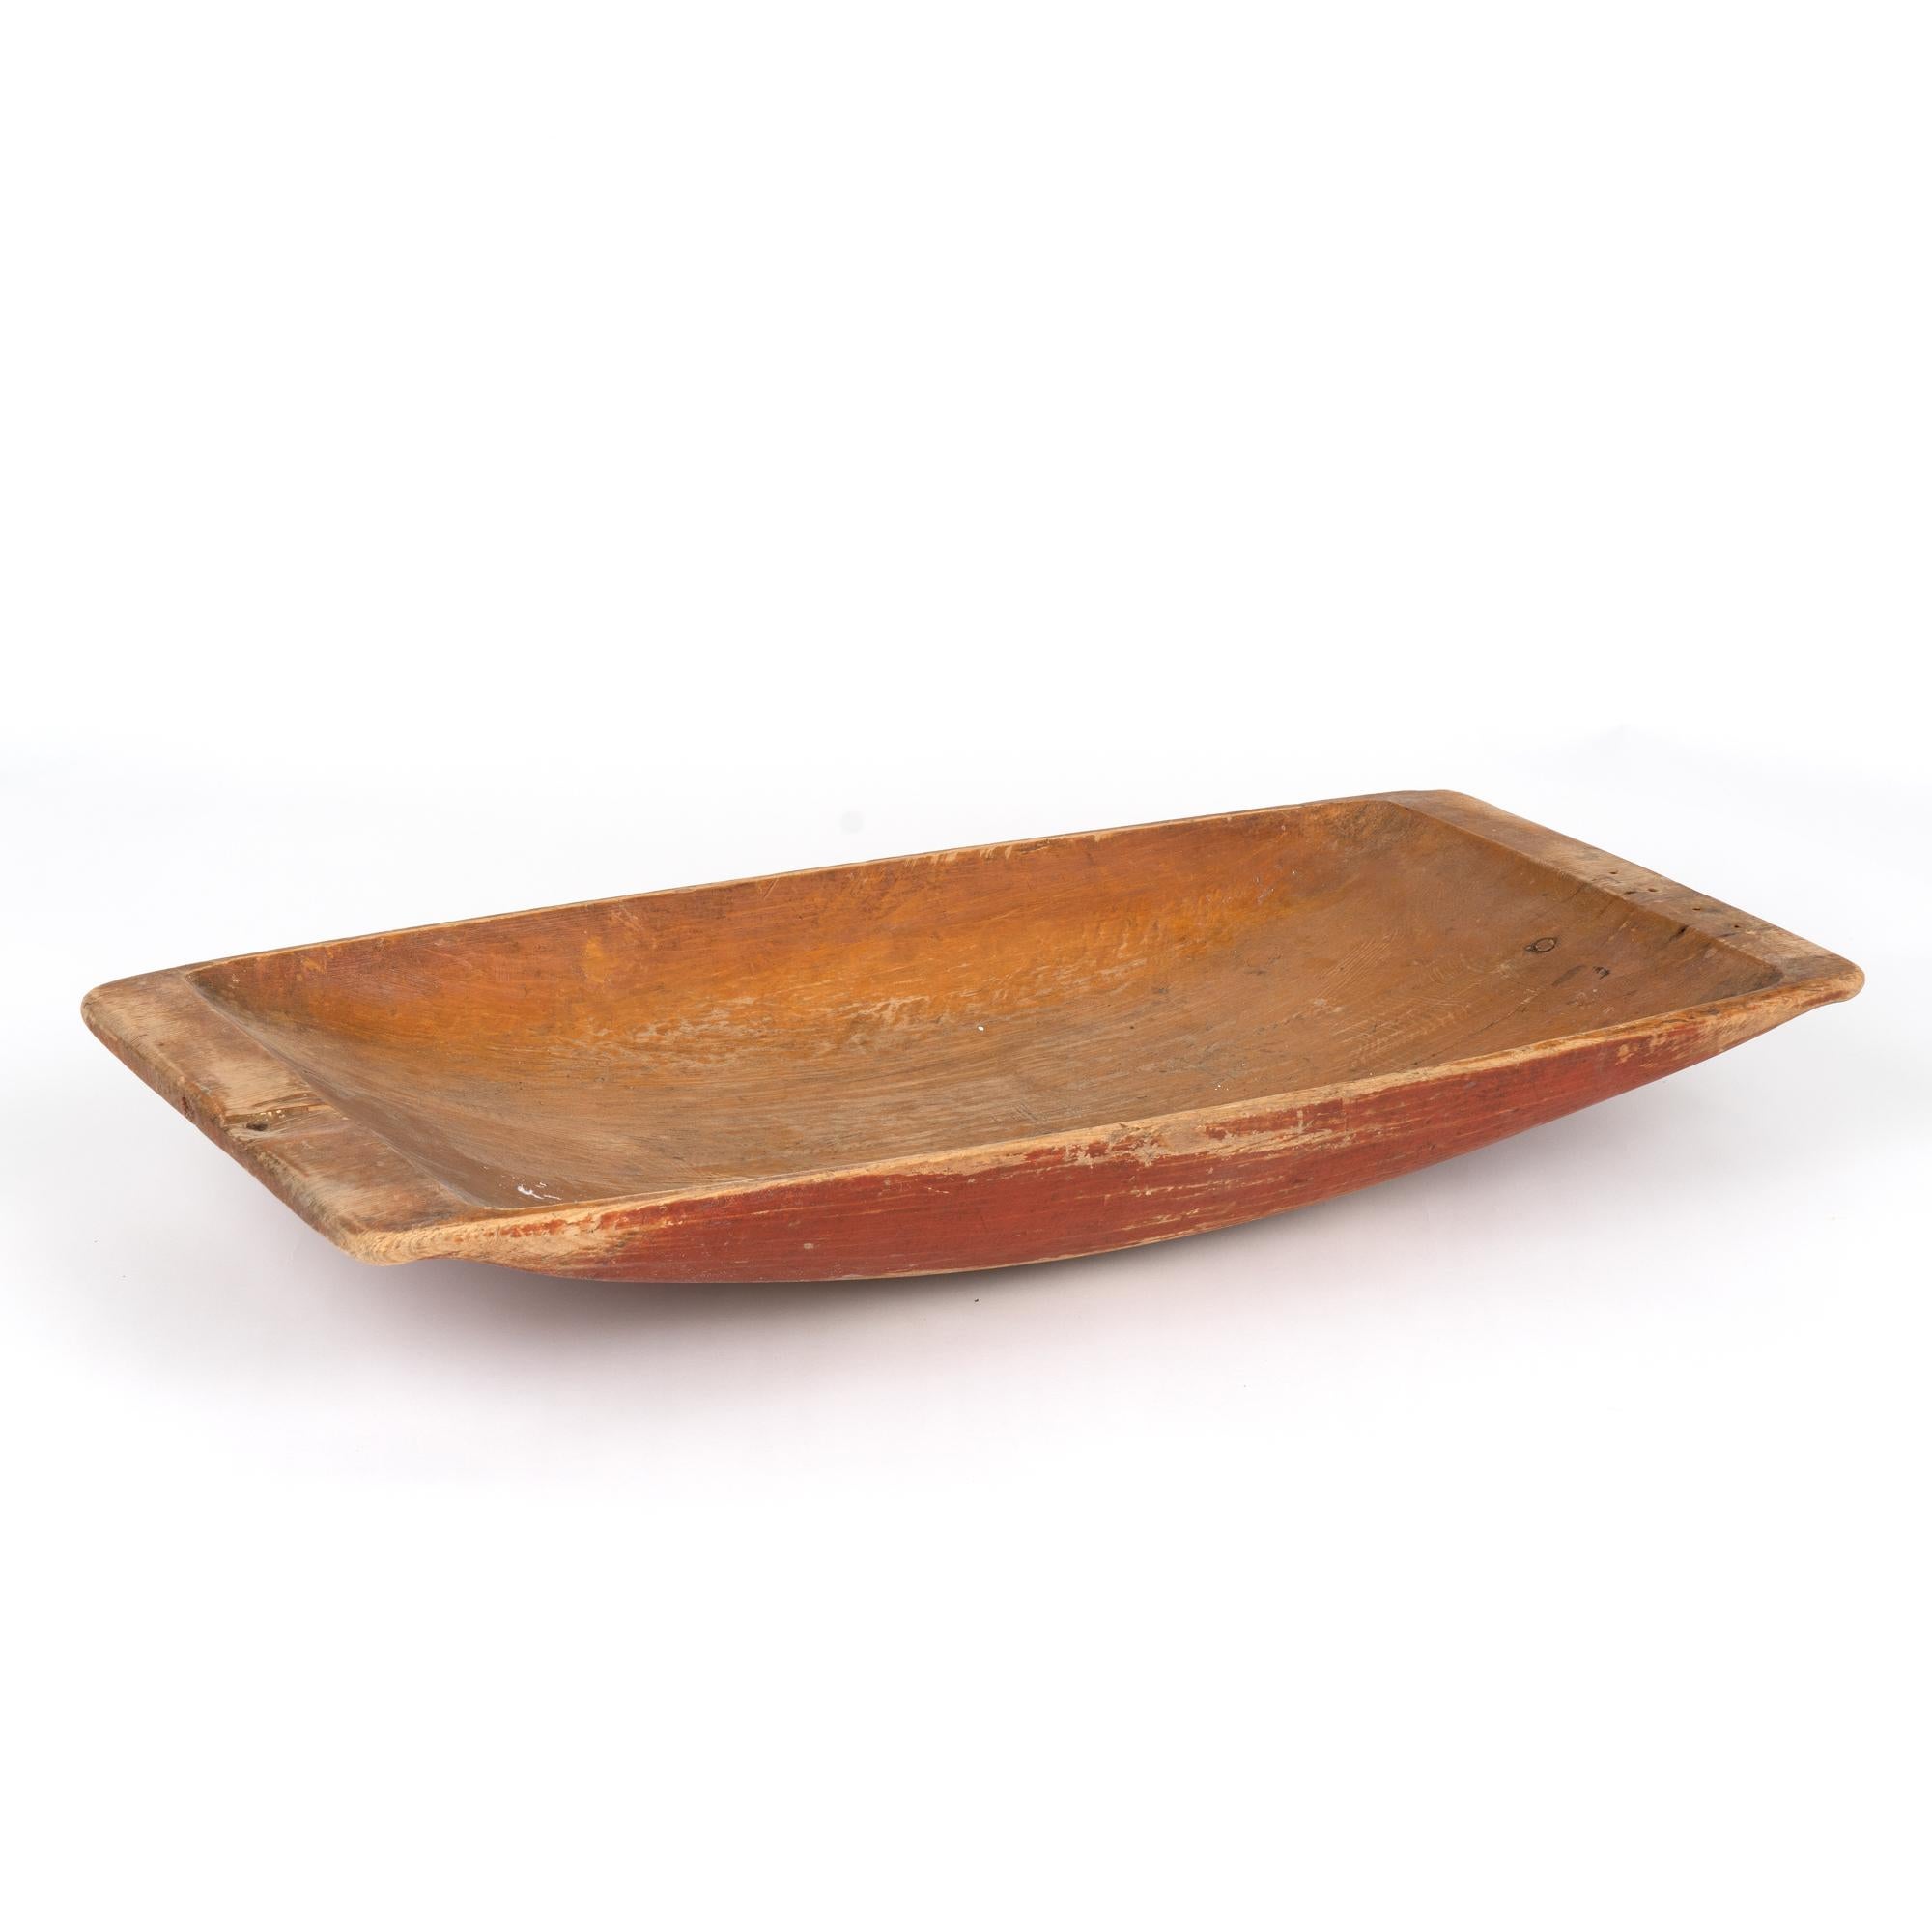 Original Red Painted Swedish Pine Wooden Bowl, circa 1880 For Sale 5